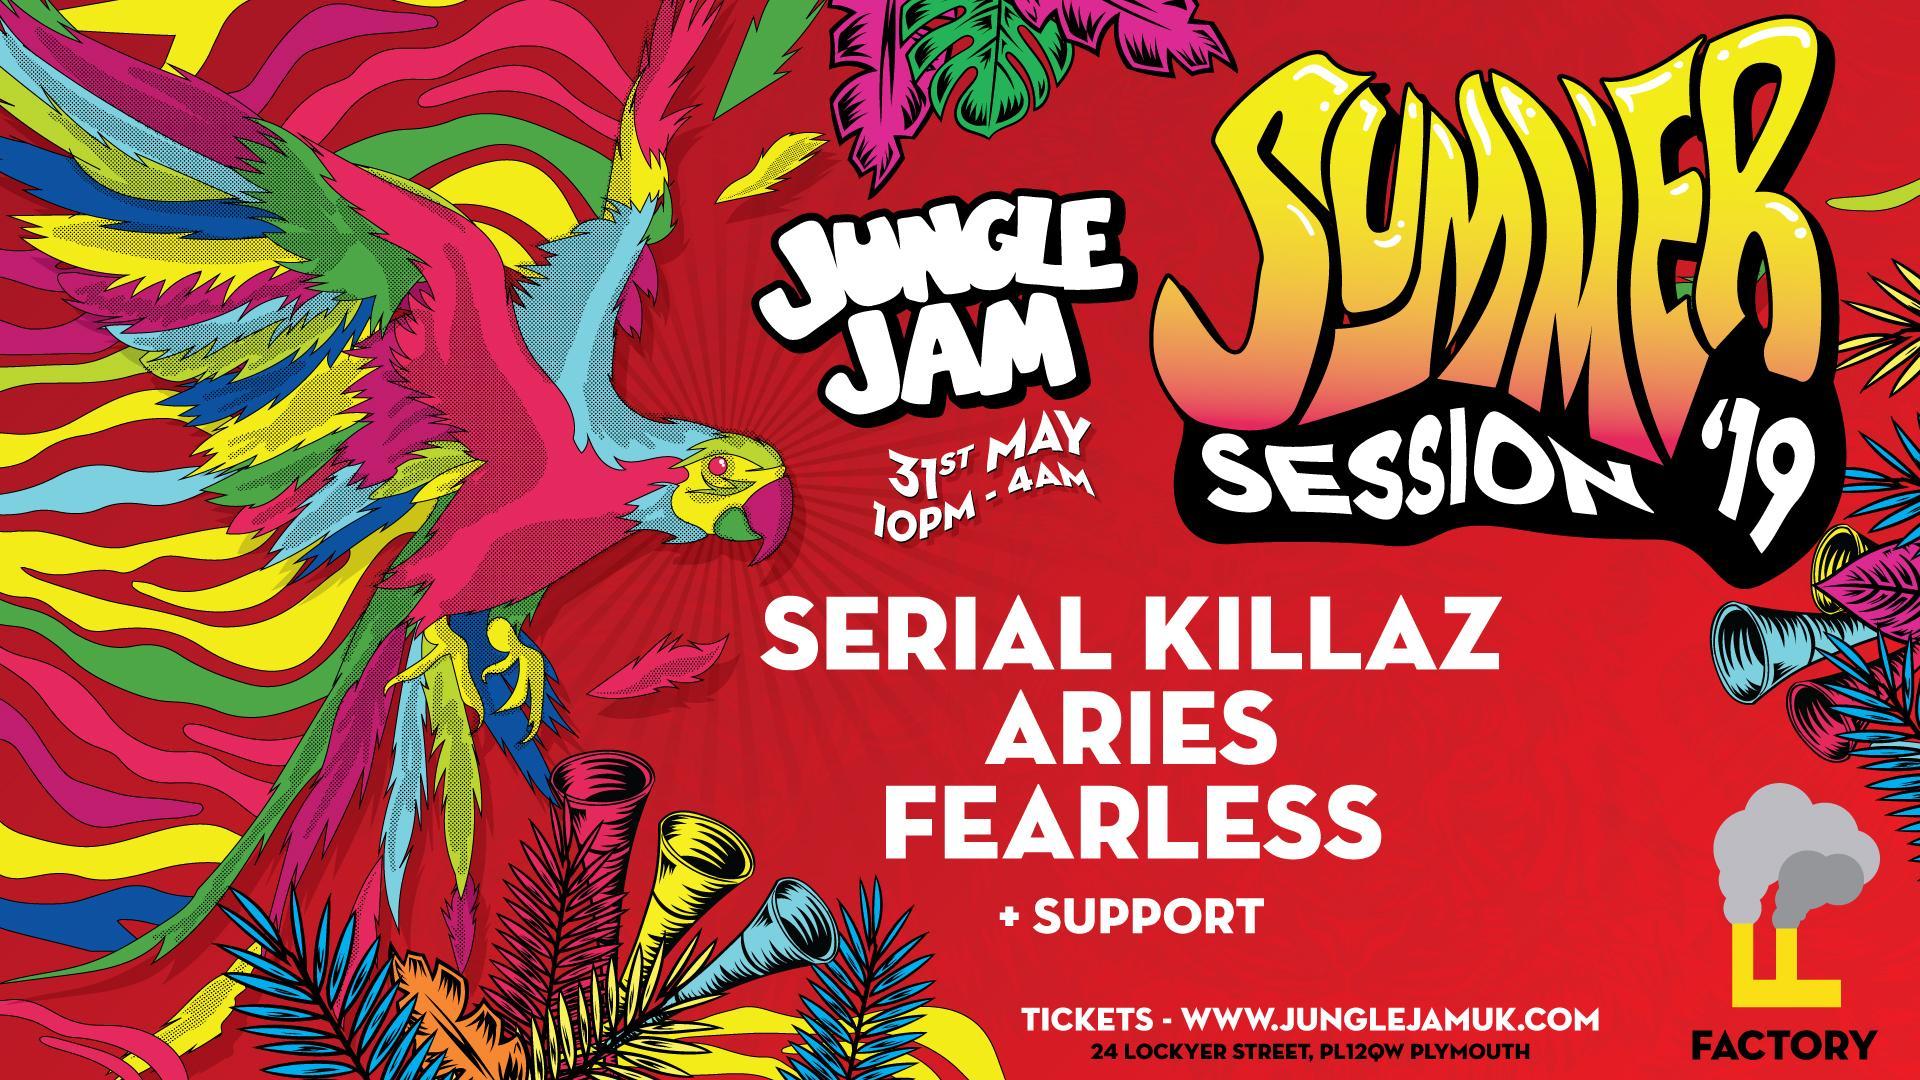 Jungle Jam Summer Session Plymouth Tickets. The Factory Plymouth